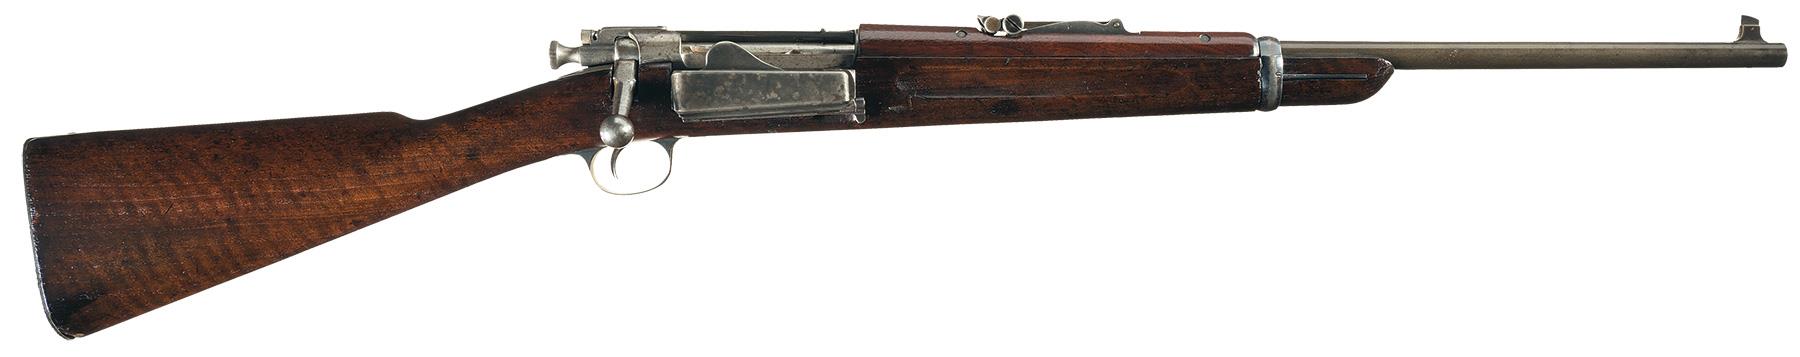 what is a a krag springfield 1898 rifle